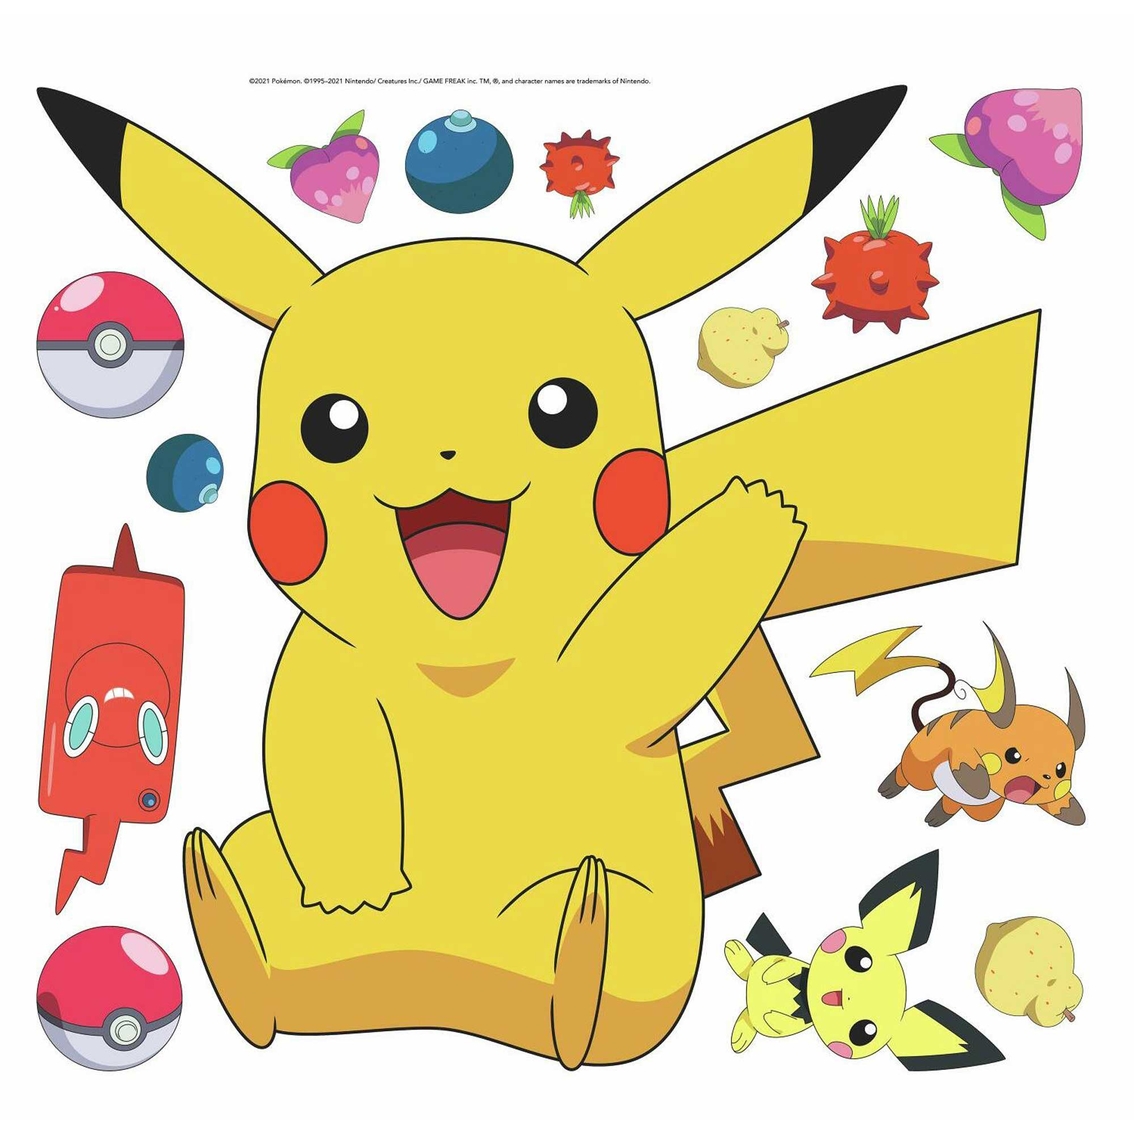 RoomMates Pikachu Peel and Stick Giant Wall Decals - Image 3 of 7